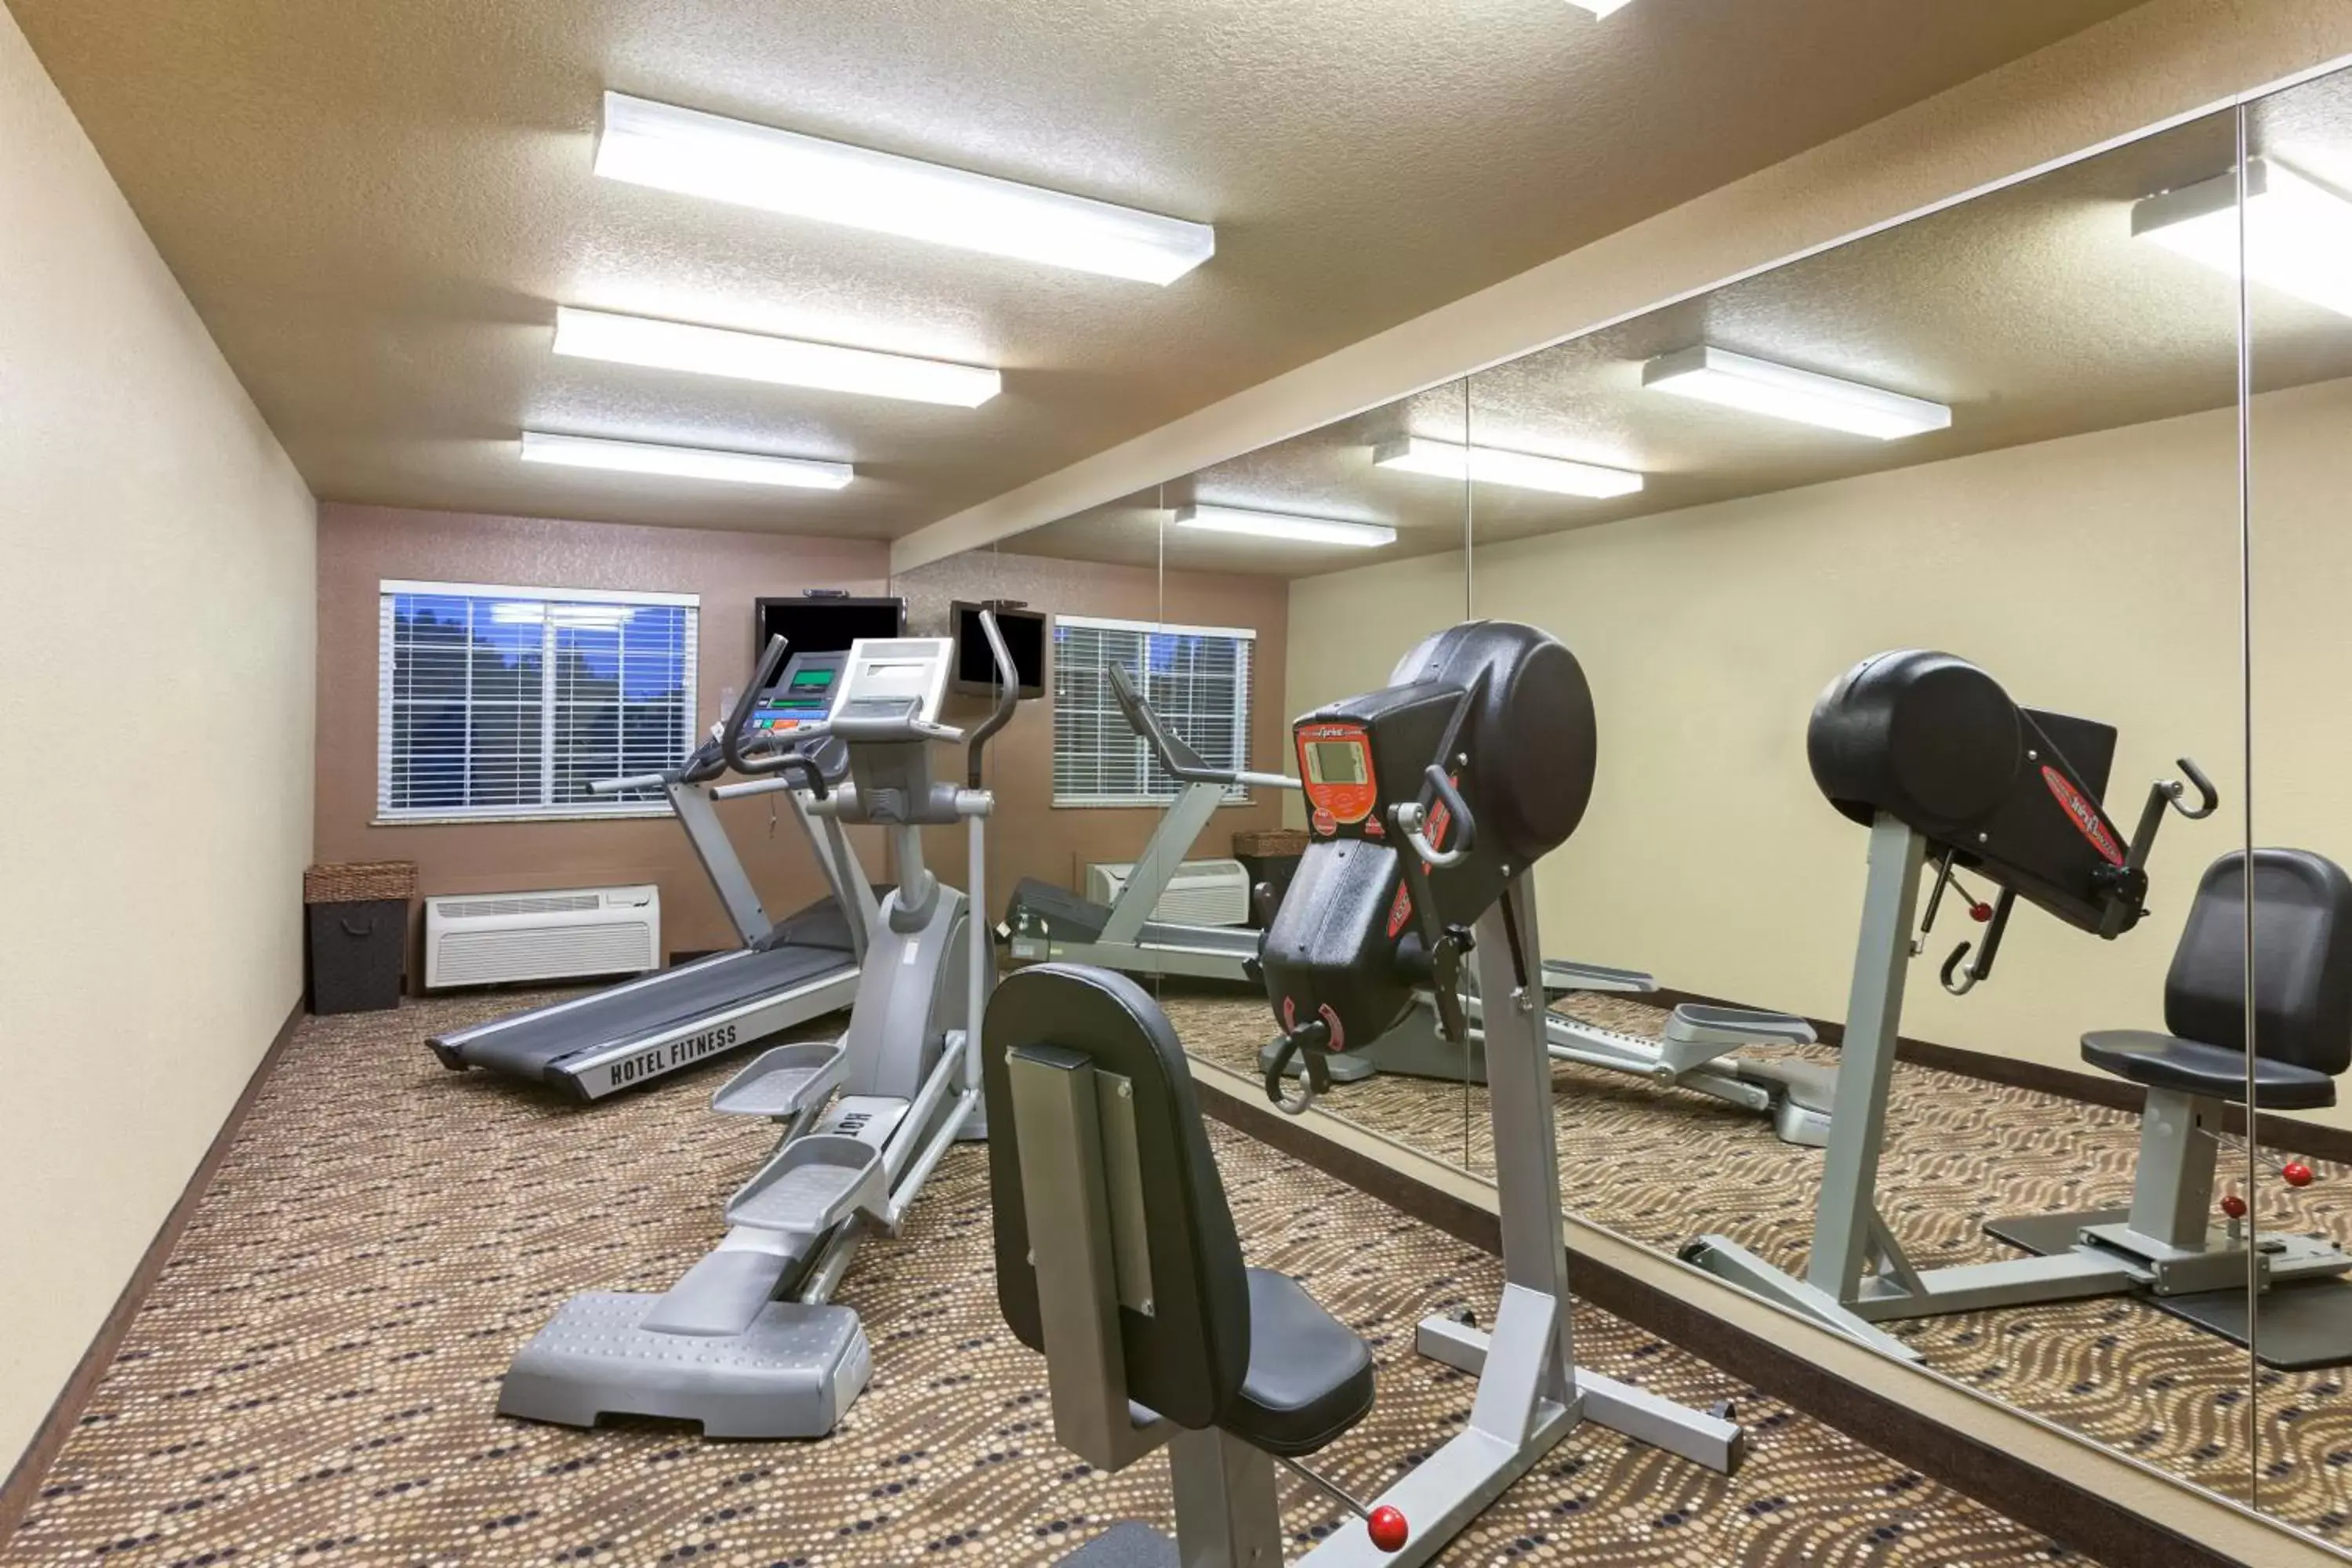 Fitness centre/facilities, Fitness Center/Facilities in Microtel Inn & Suites by Wyndham Searcy